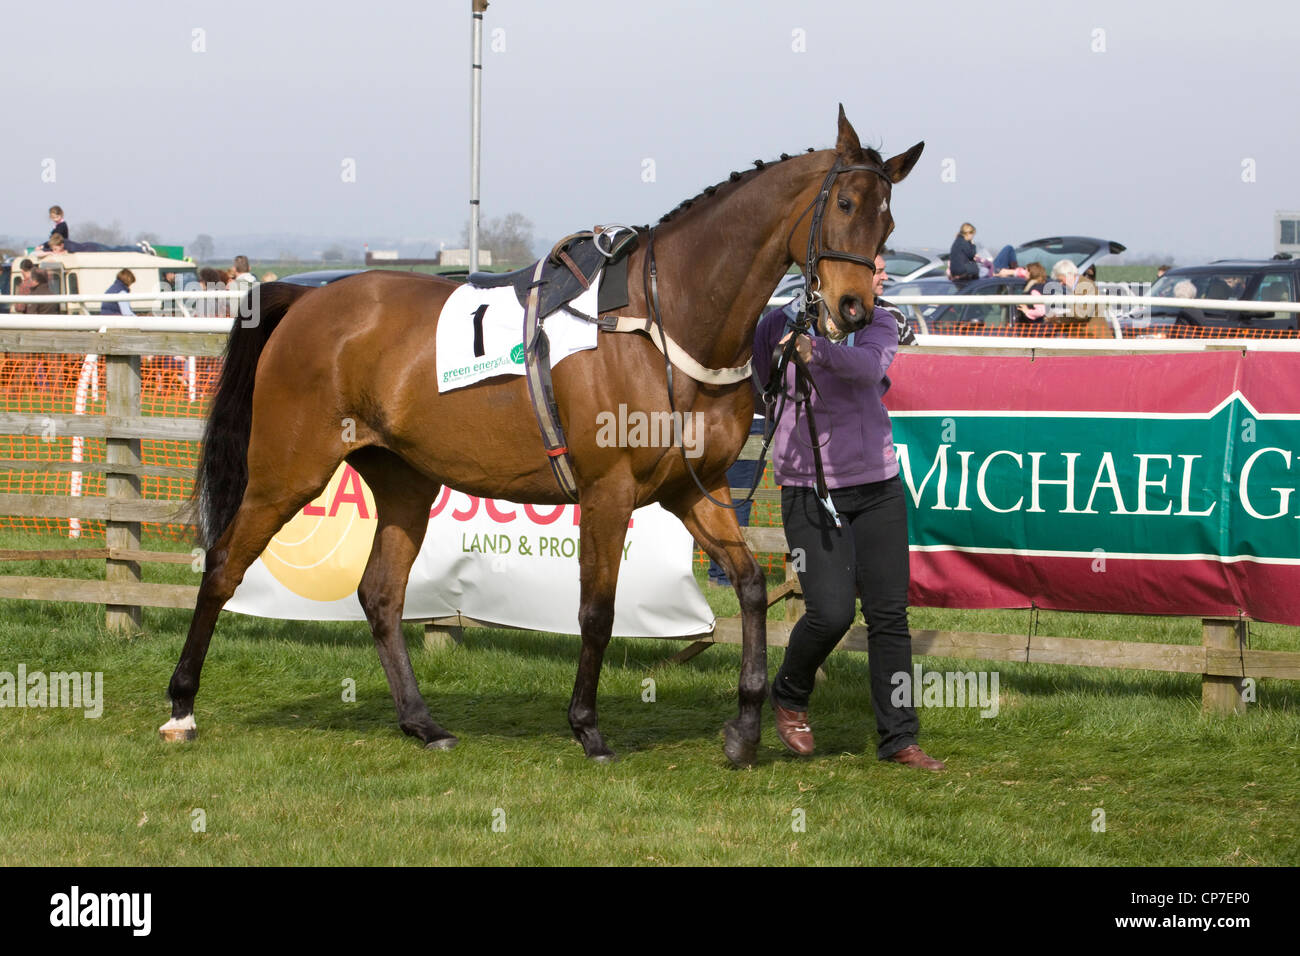 A  Thoroughbred horse Equus ferus caballus in the collecting ring being lead around Stock Photo